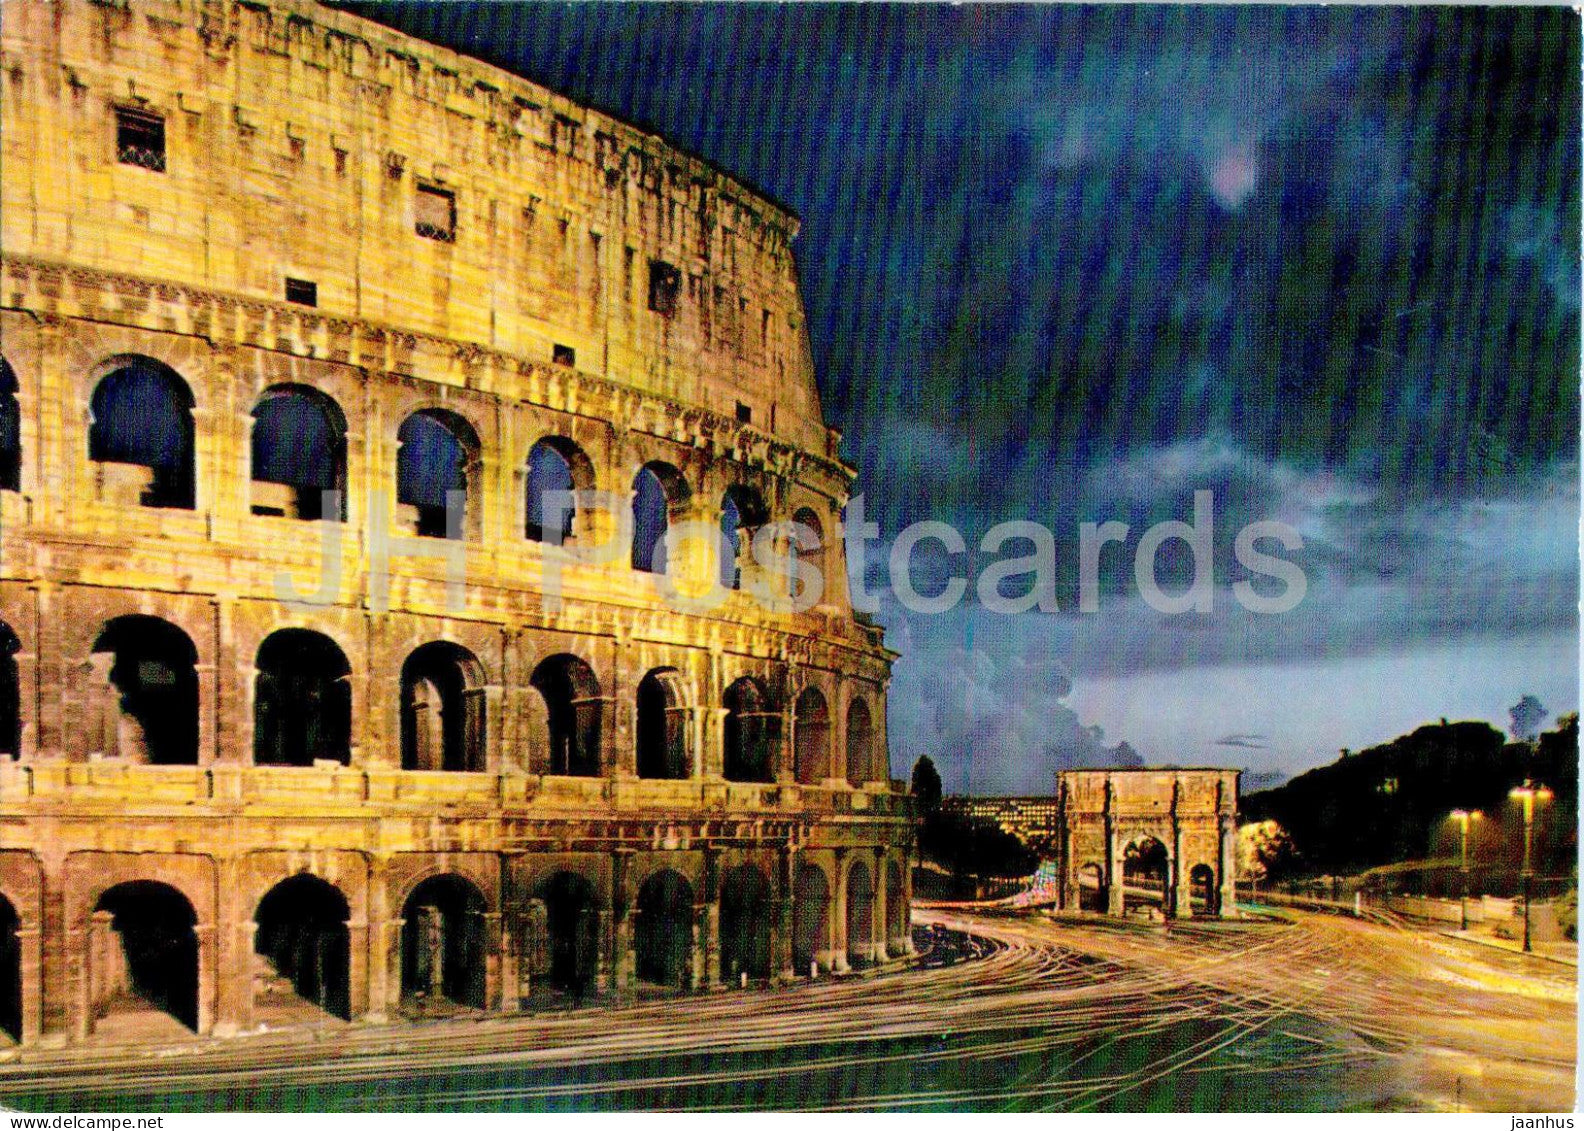 Roma - Rome - Colosseo e Arco di Costantino - Colosseum and Arch of Constantine ancient world - 33045 - Italy - unused - JH Postcards